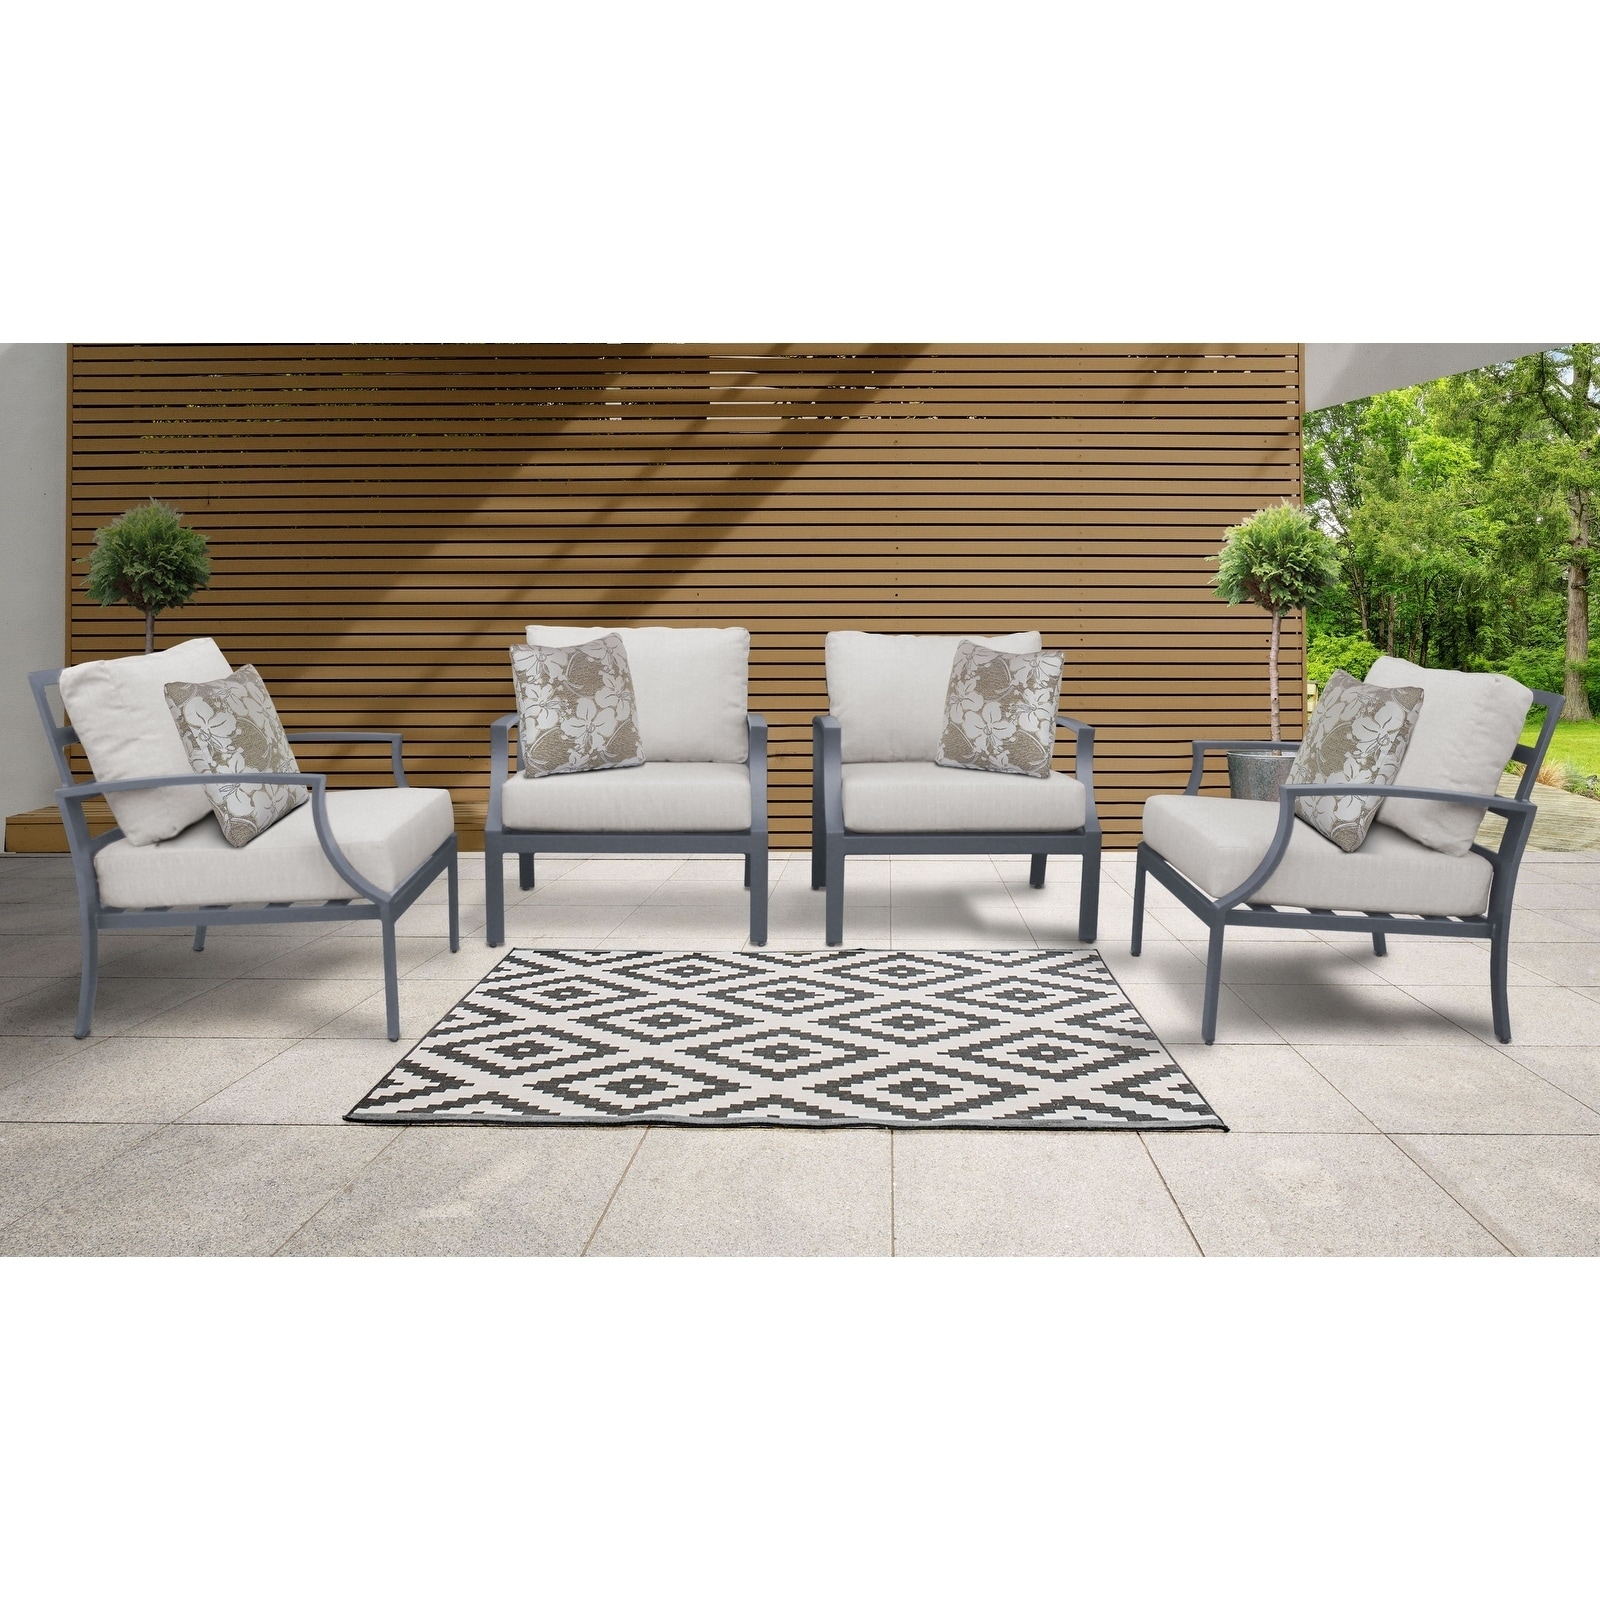 Moresby 4-piece Outdoor Aluminum Patio Furniture Set 04g By Havenside Home